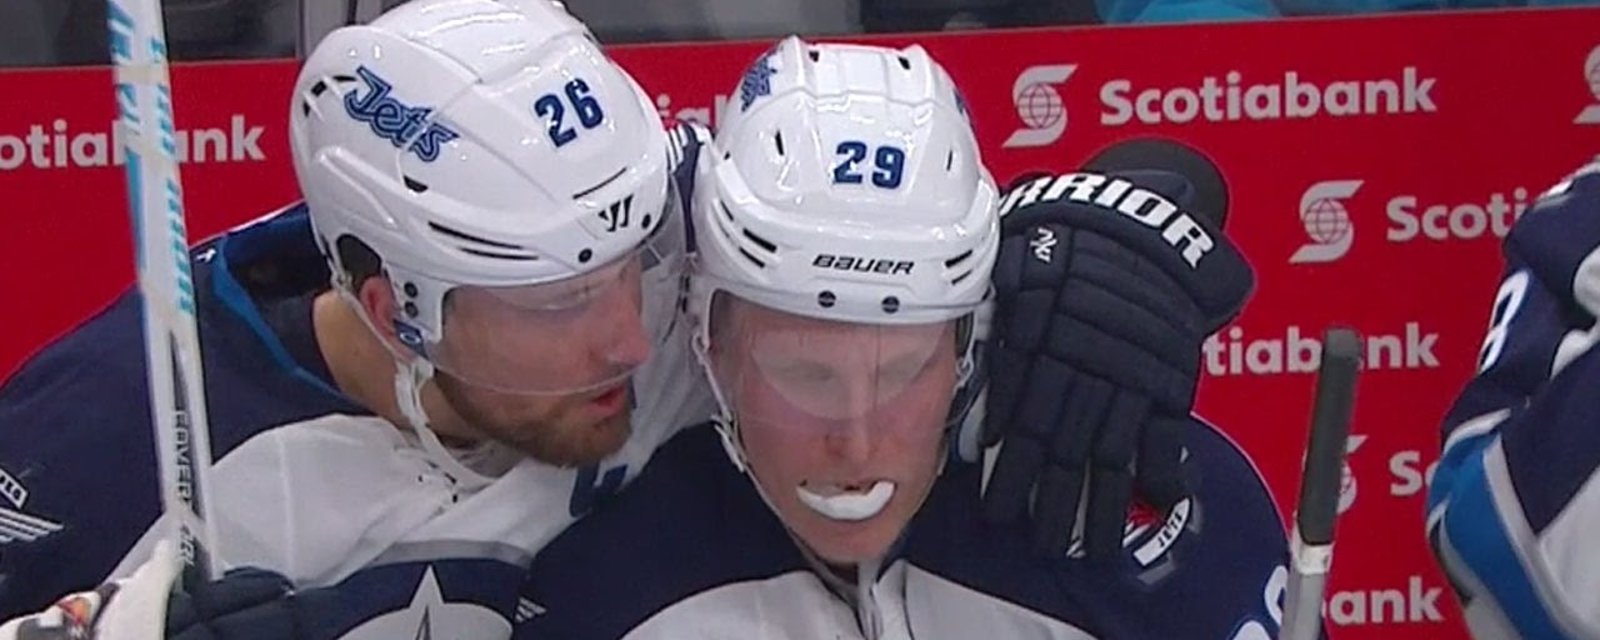 Hugely embarrassing moment from one of the NHL's leading scorers last night.